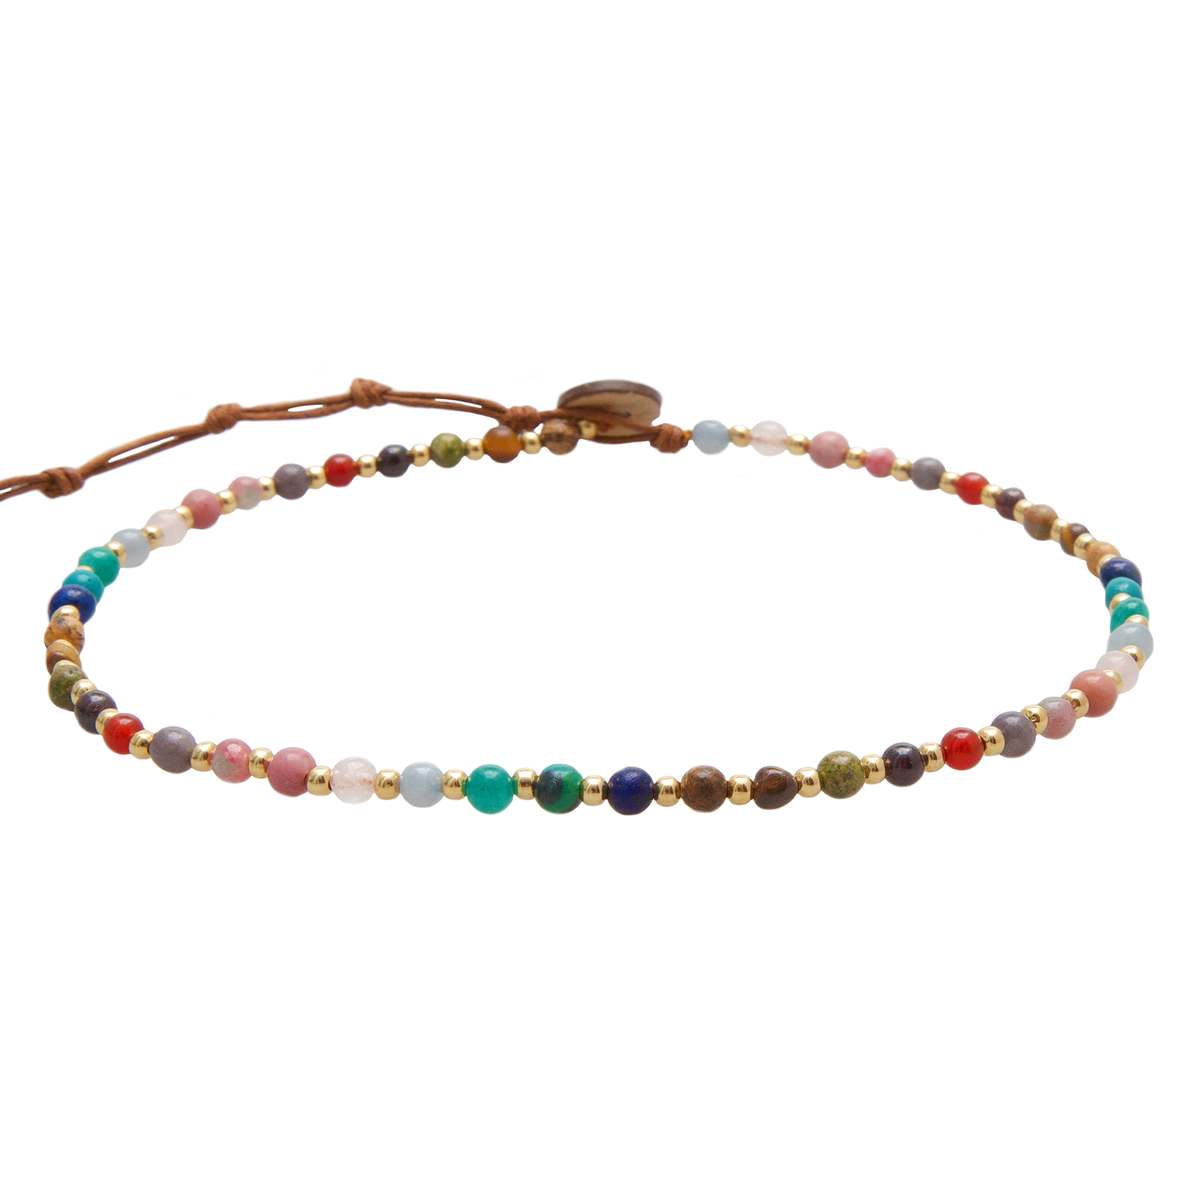 4mm multicolor stone and gold bead healing necklace with a coconut button clasp